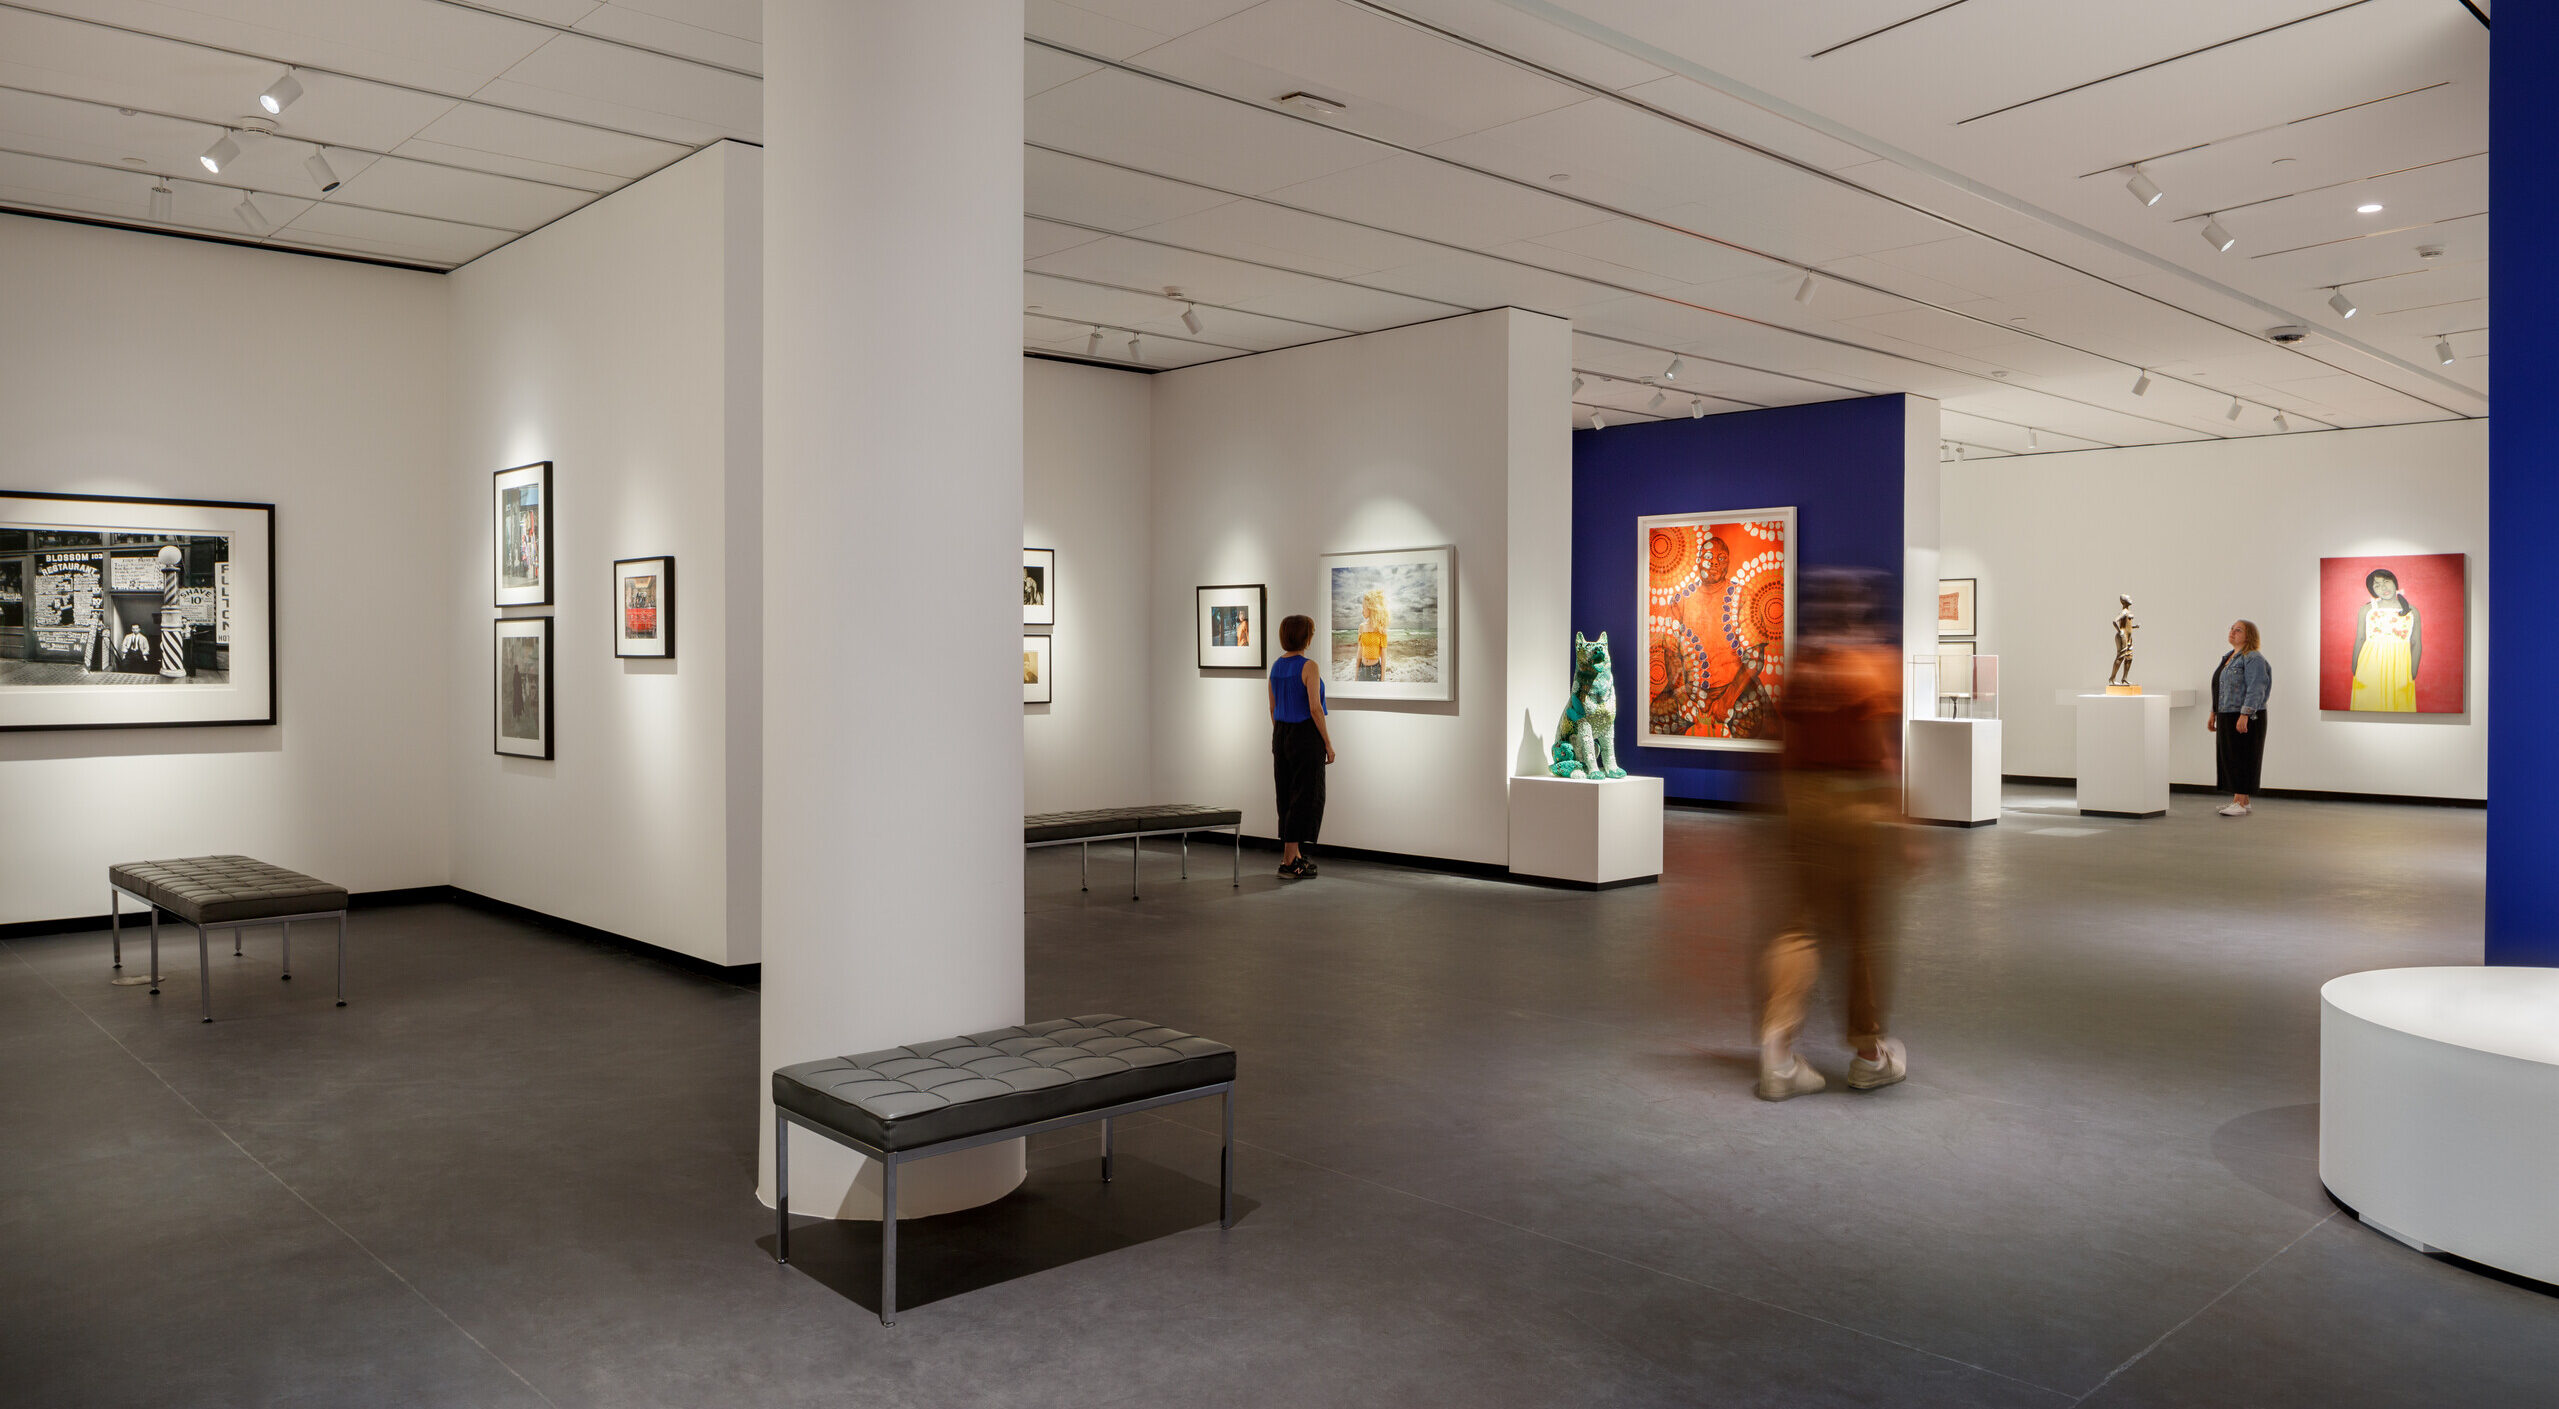 A modern museum gallery is photographed at a wide angle. It features several inset bays in which art of various sizes and mediums is hung. Visitors walk through the galleries and observe the works.